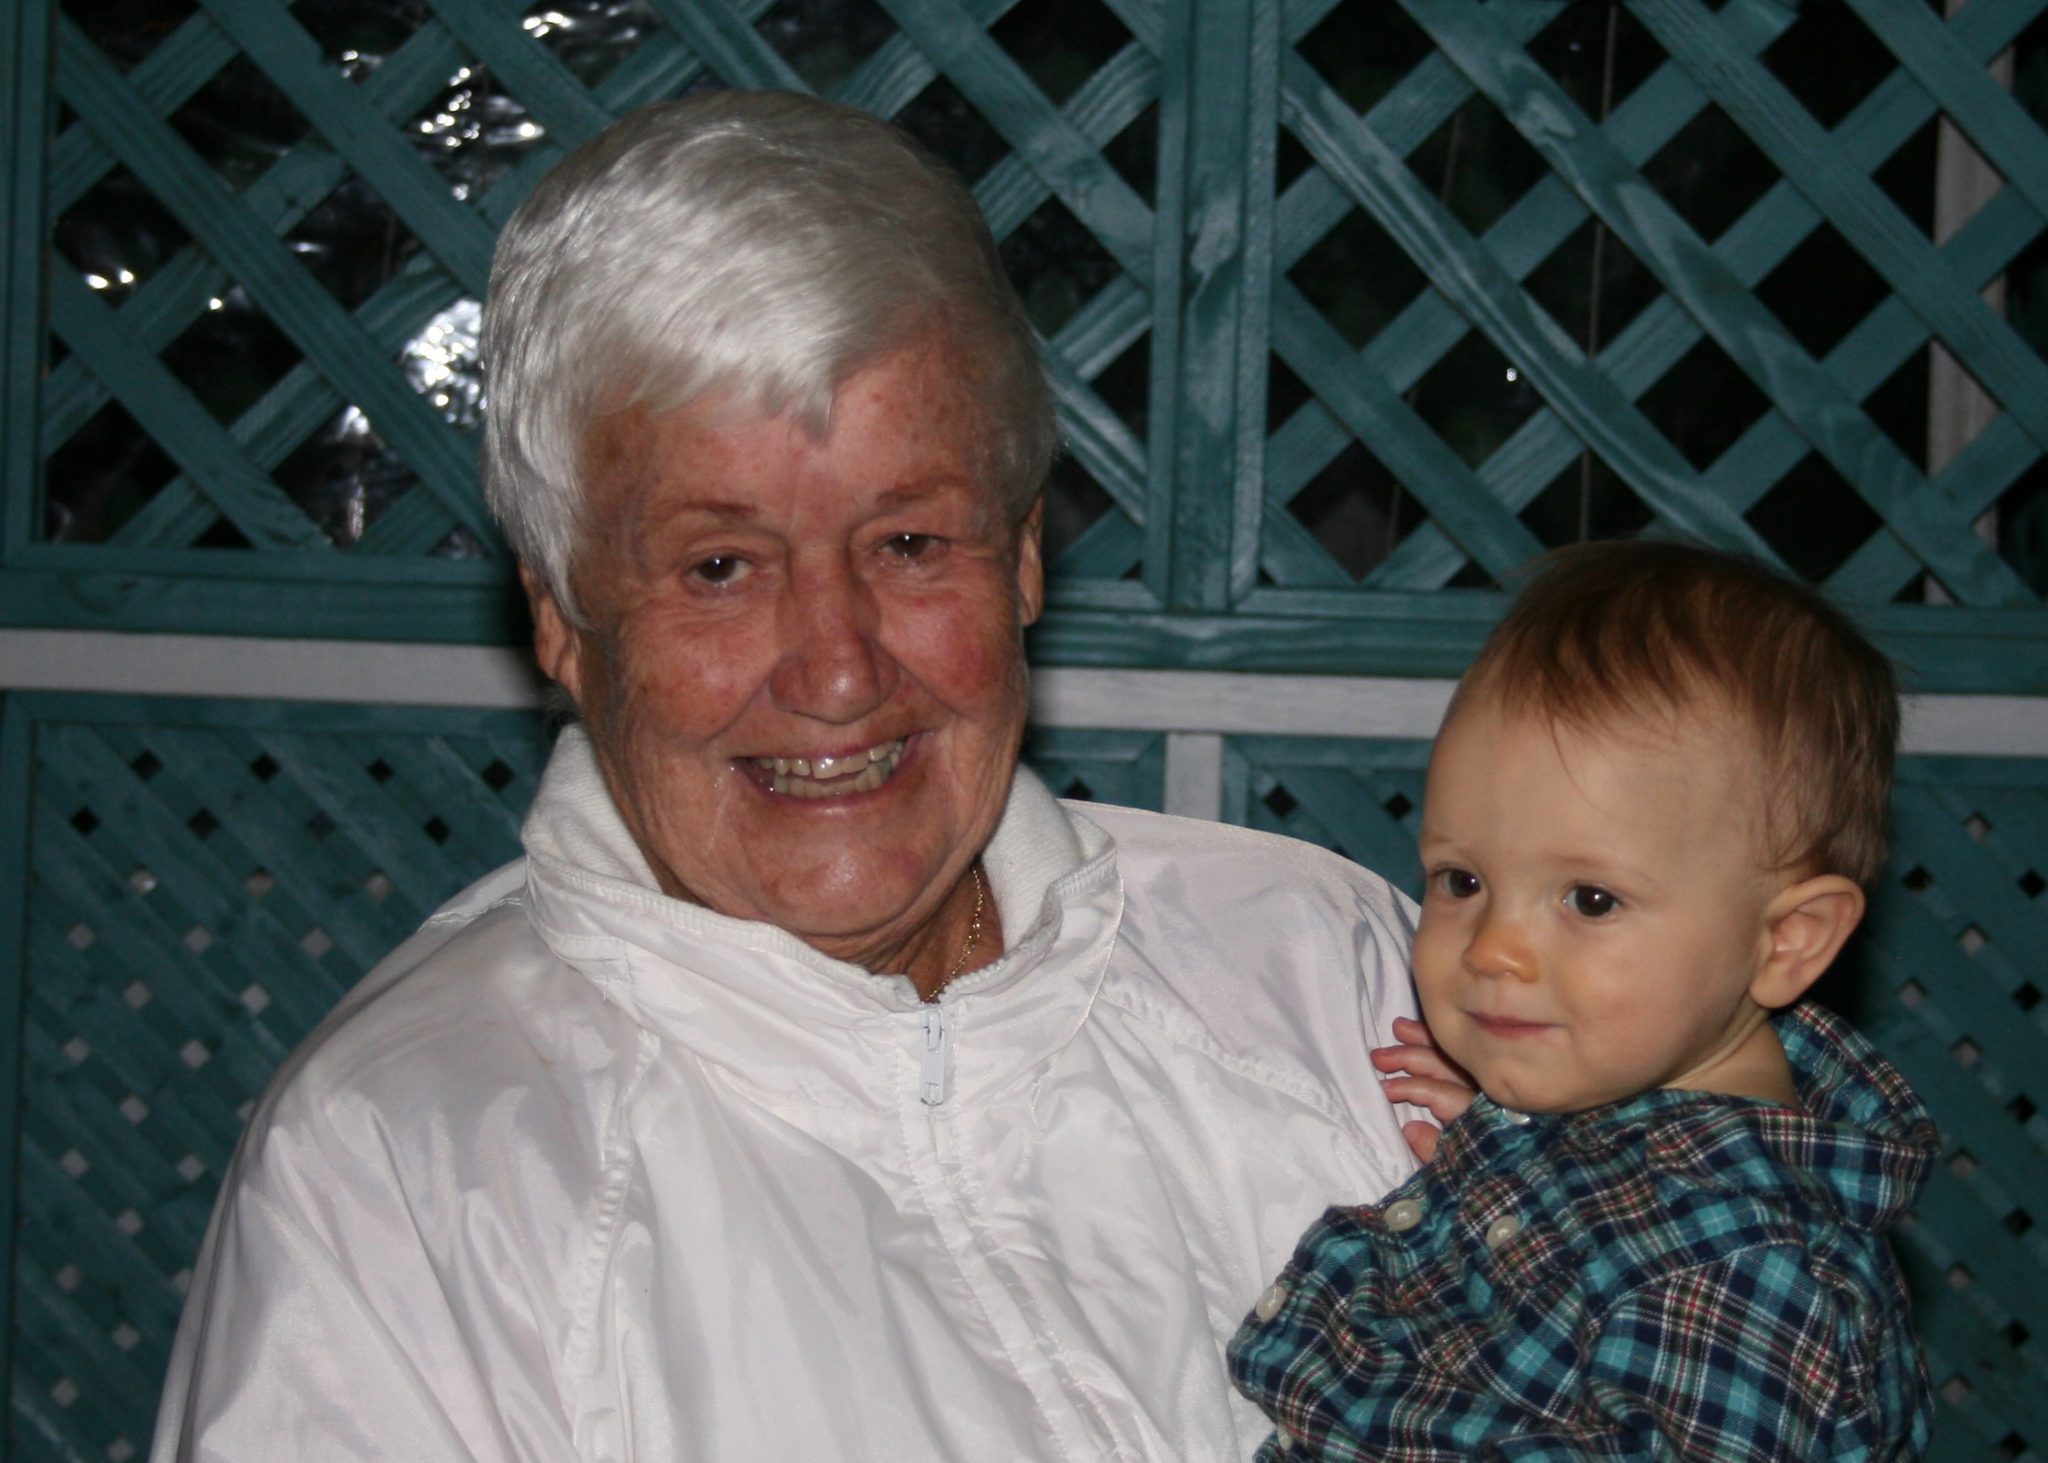 This is Aunt Pat with her Great-Nephew Mason Simmons